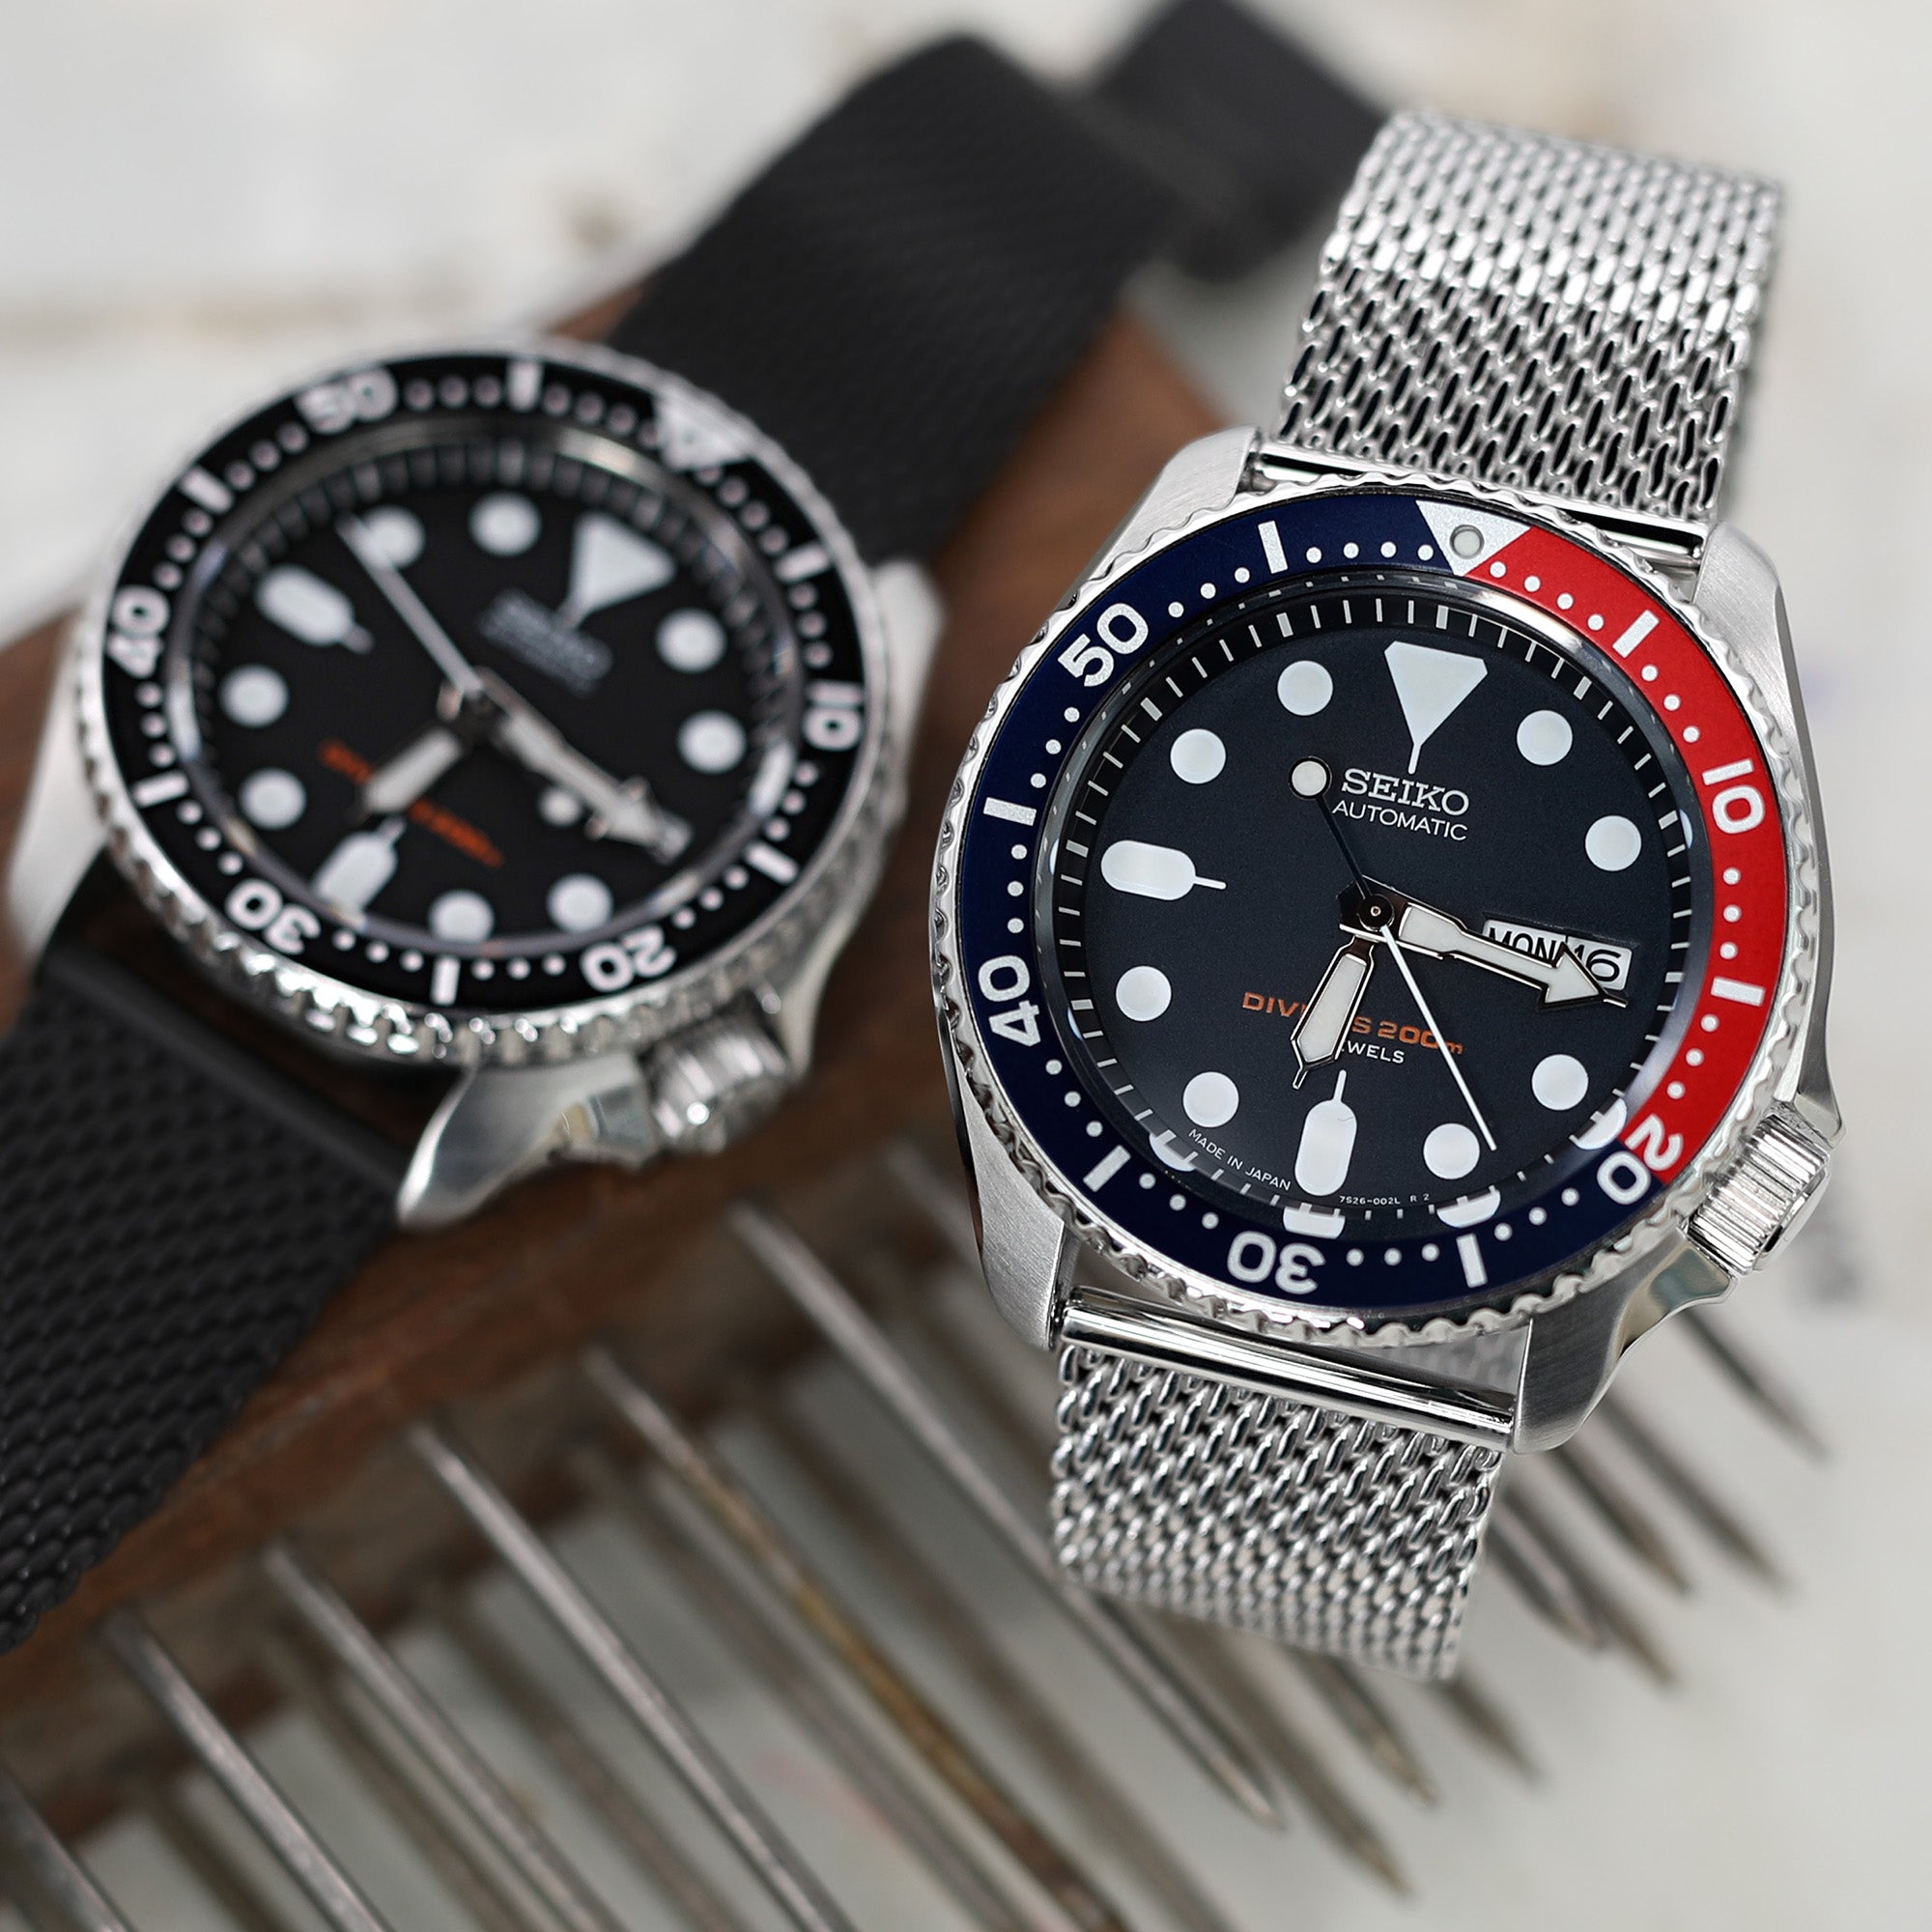 Best Fitted Mesh Band For Your SKX! (Look alike Seiko 5 Sports) | Strapcode